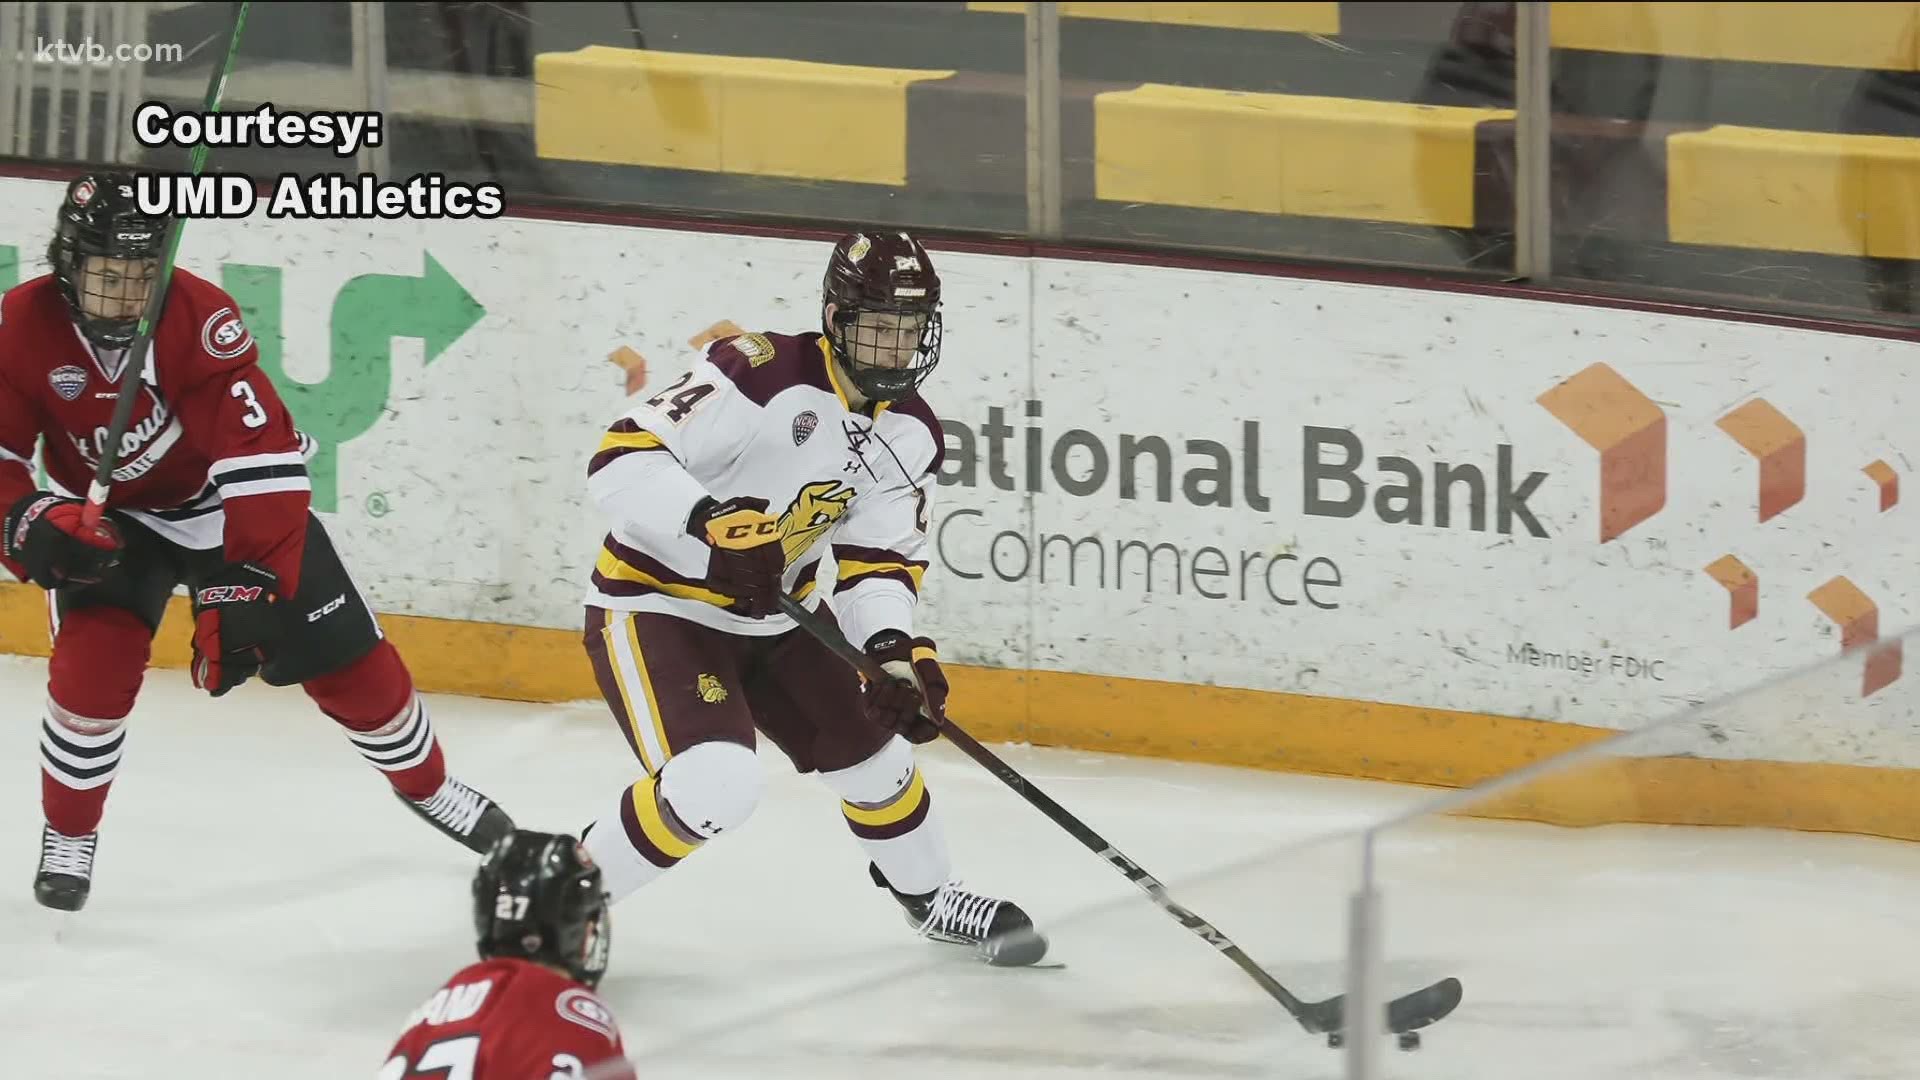 During the regional final between Minnesota Duluth and North Dakota, he scored the game-winning goal in the game’s fifth overtime.